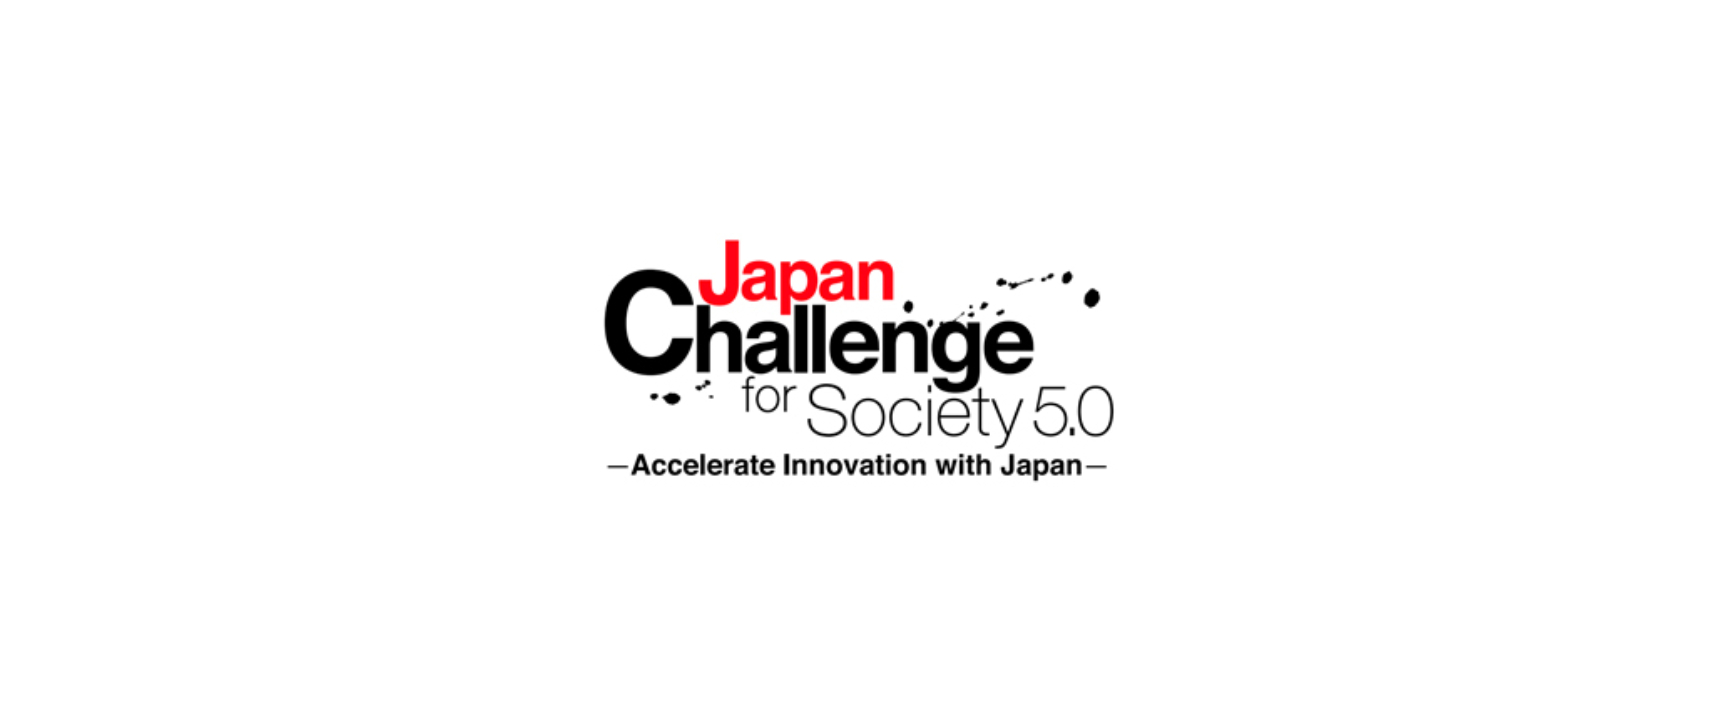 Bisly is the winner of the Japanese innovation contest „Japan Challenge for Society 5.0 – Accelerate Innovation with Japan“ - Bisly